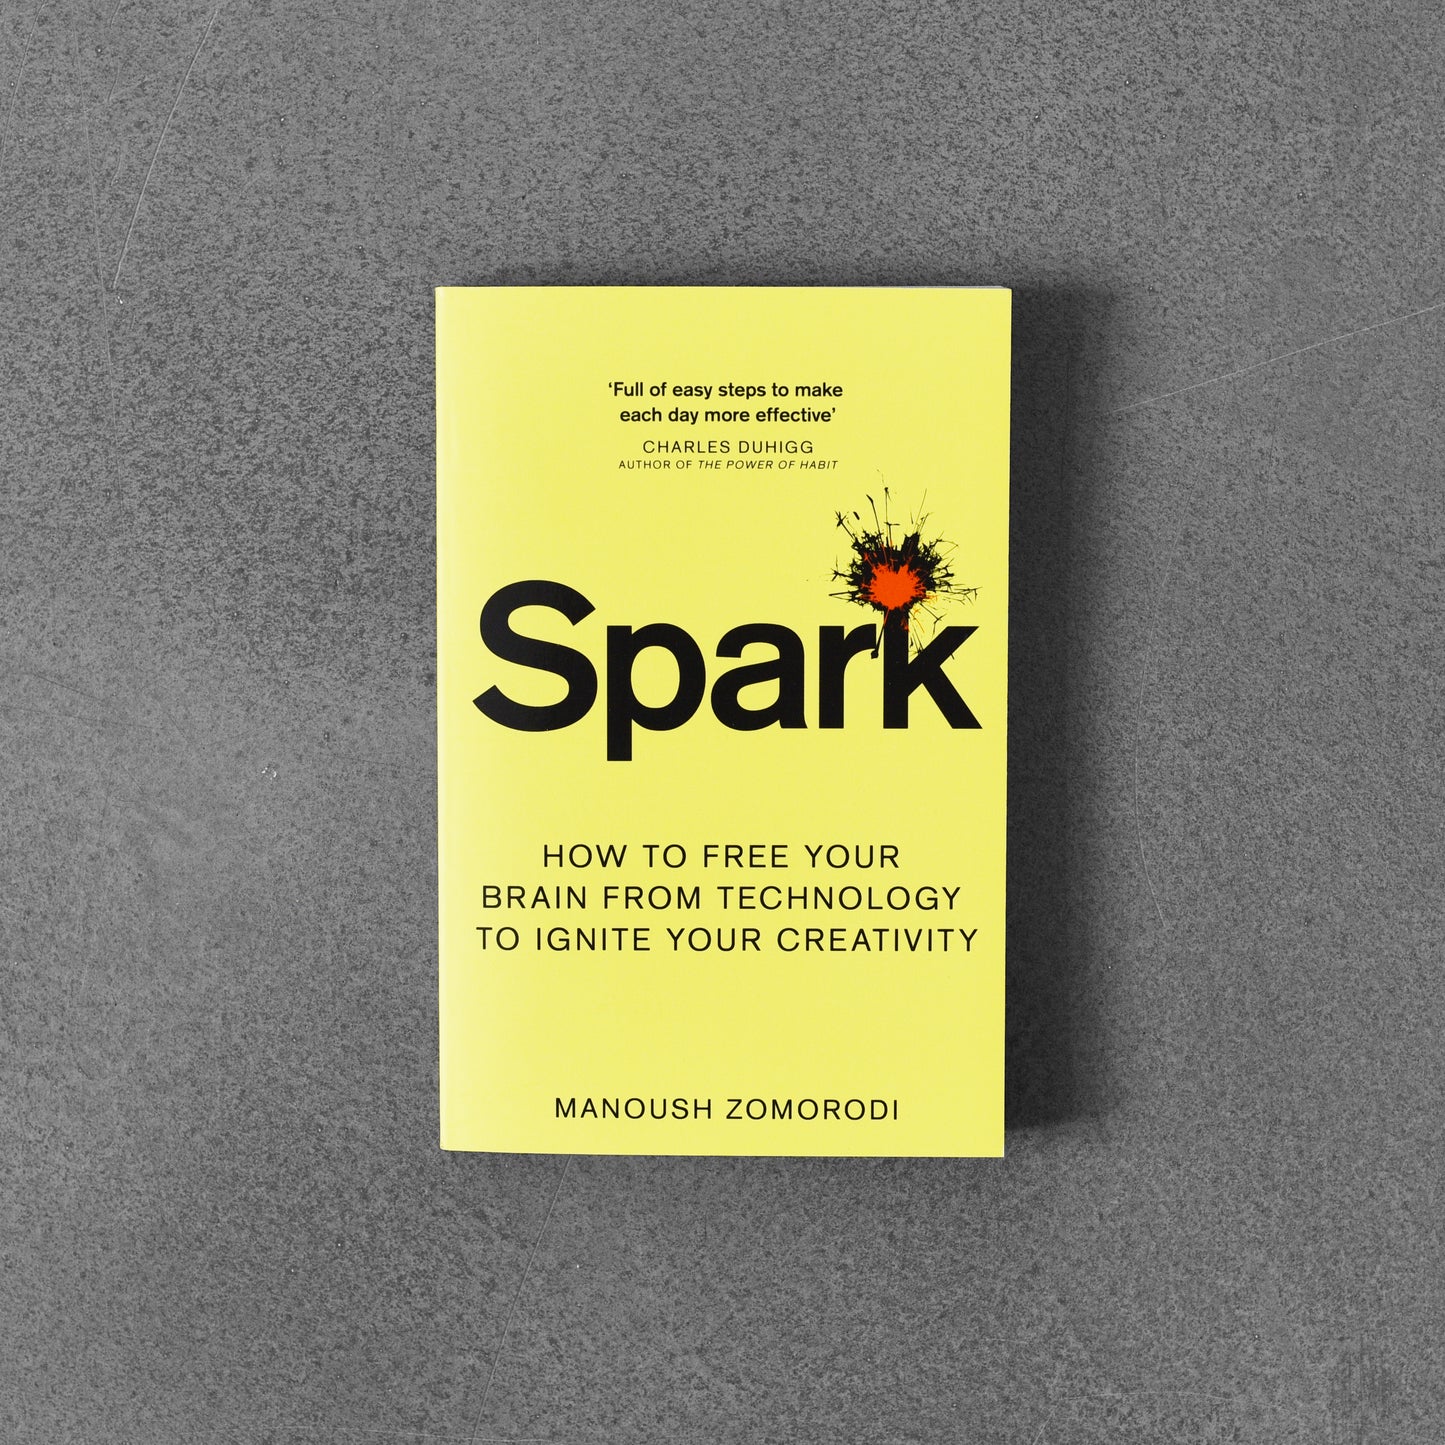 Spark: How to Free Your Brain from Technology to Ignite Your Creativity - Manoush Zomorodi